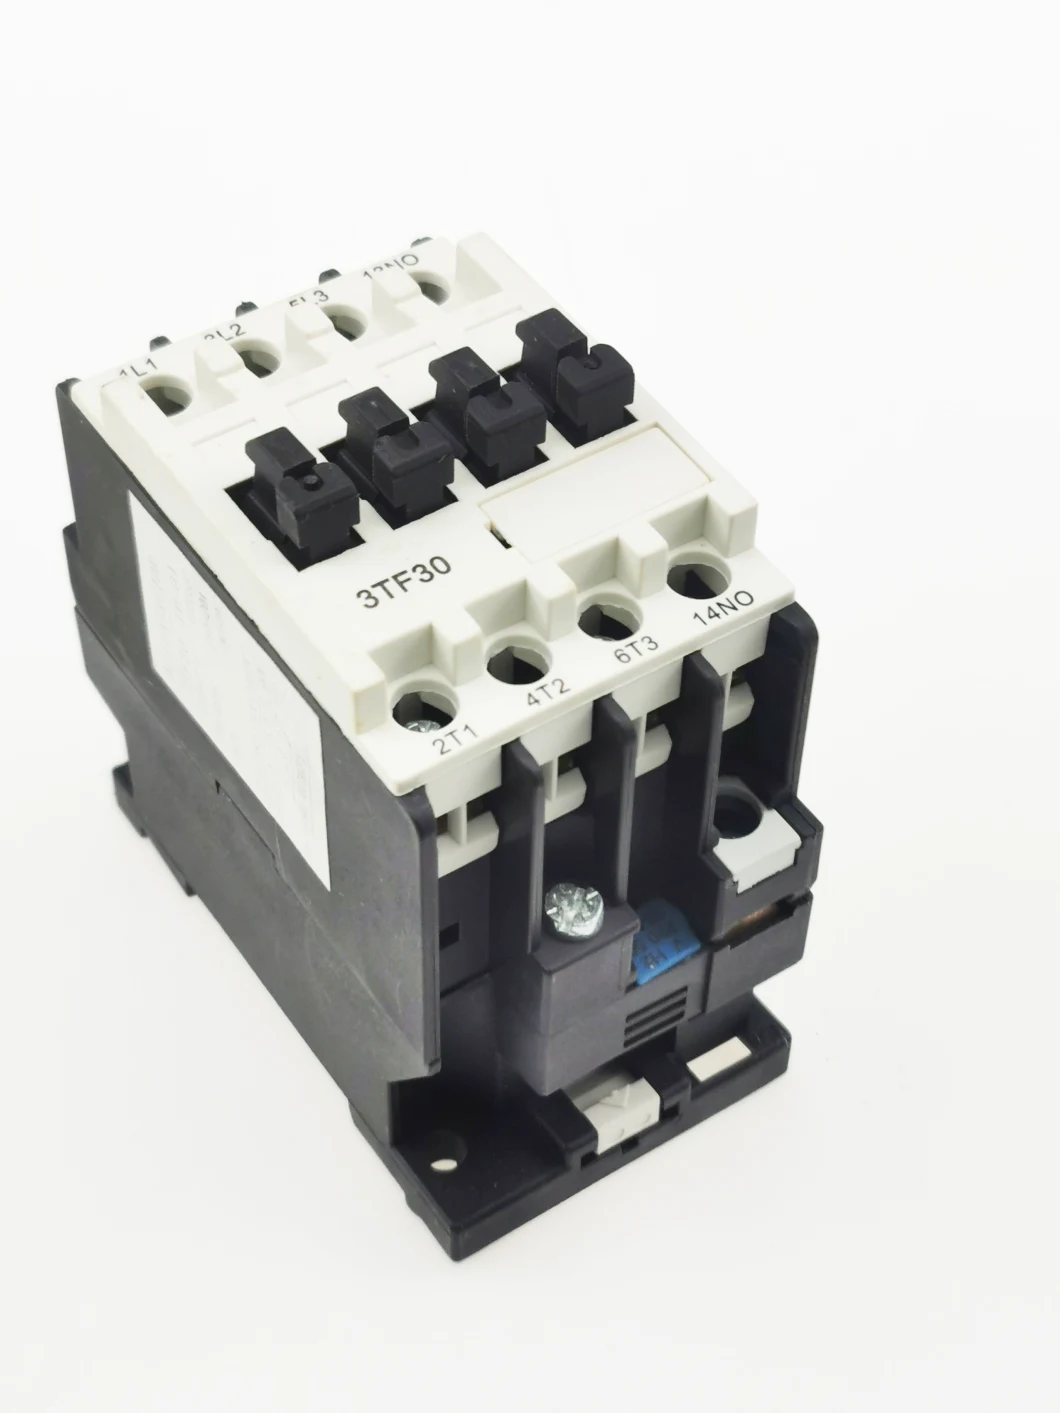 3TF35 AC Contactor, ISO9001 Passed High Quality AC Contactor, CE Proved AC Contactor